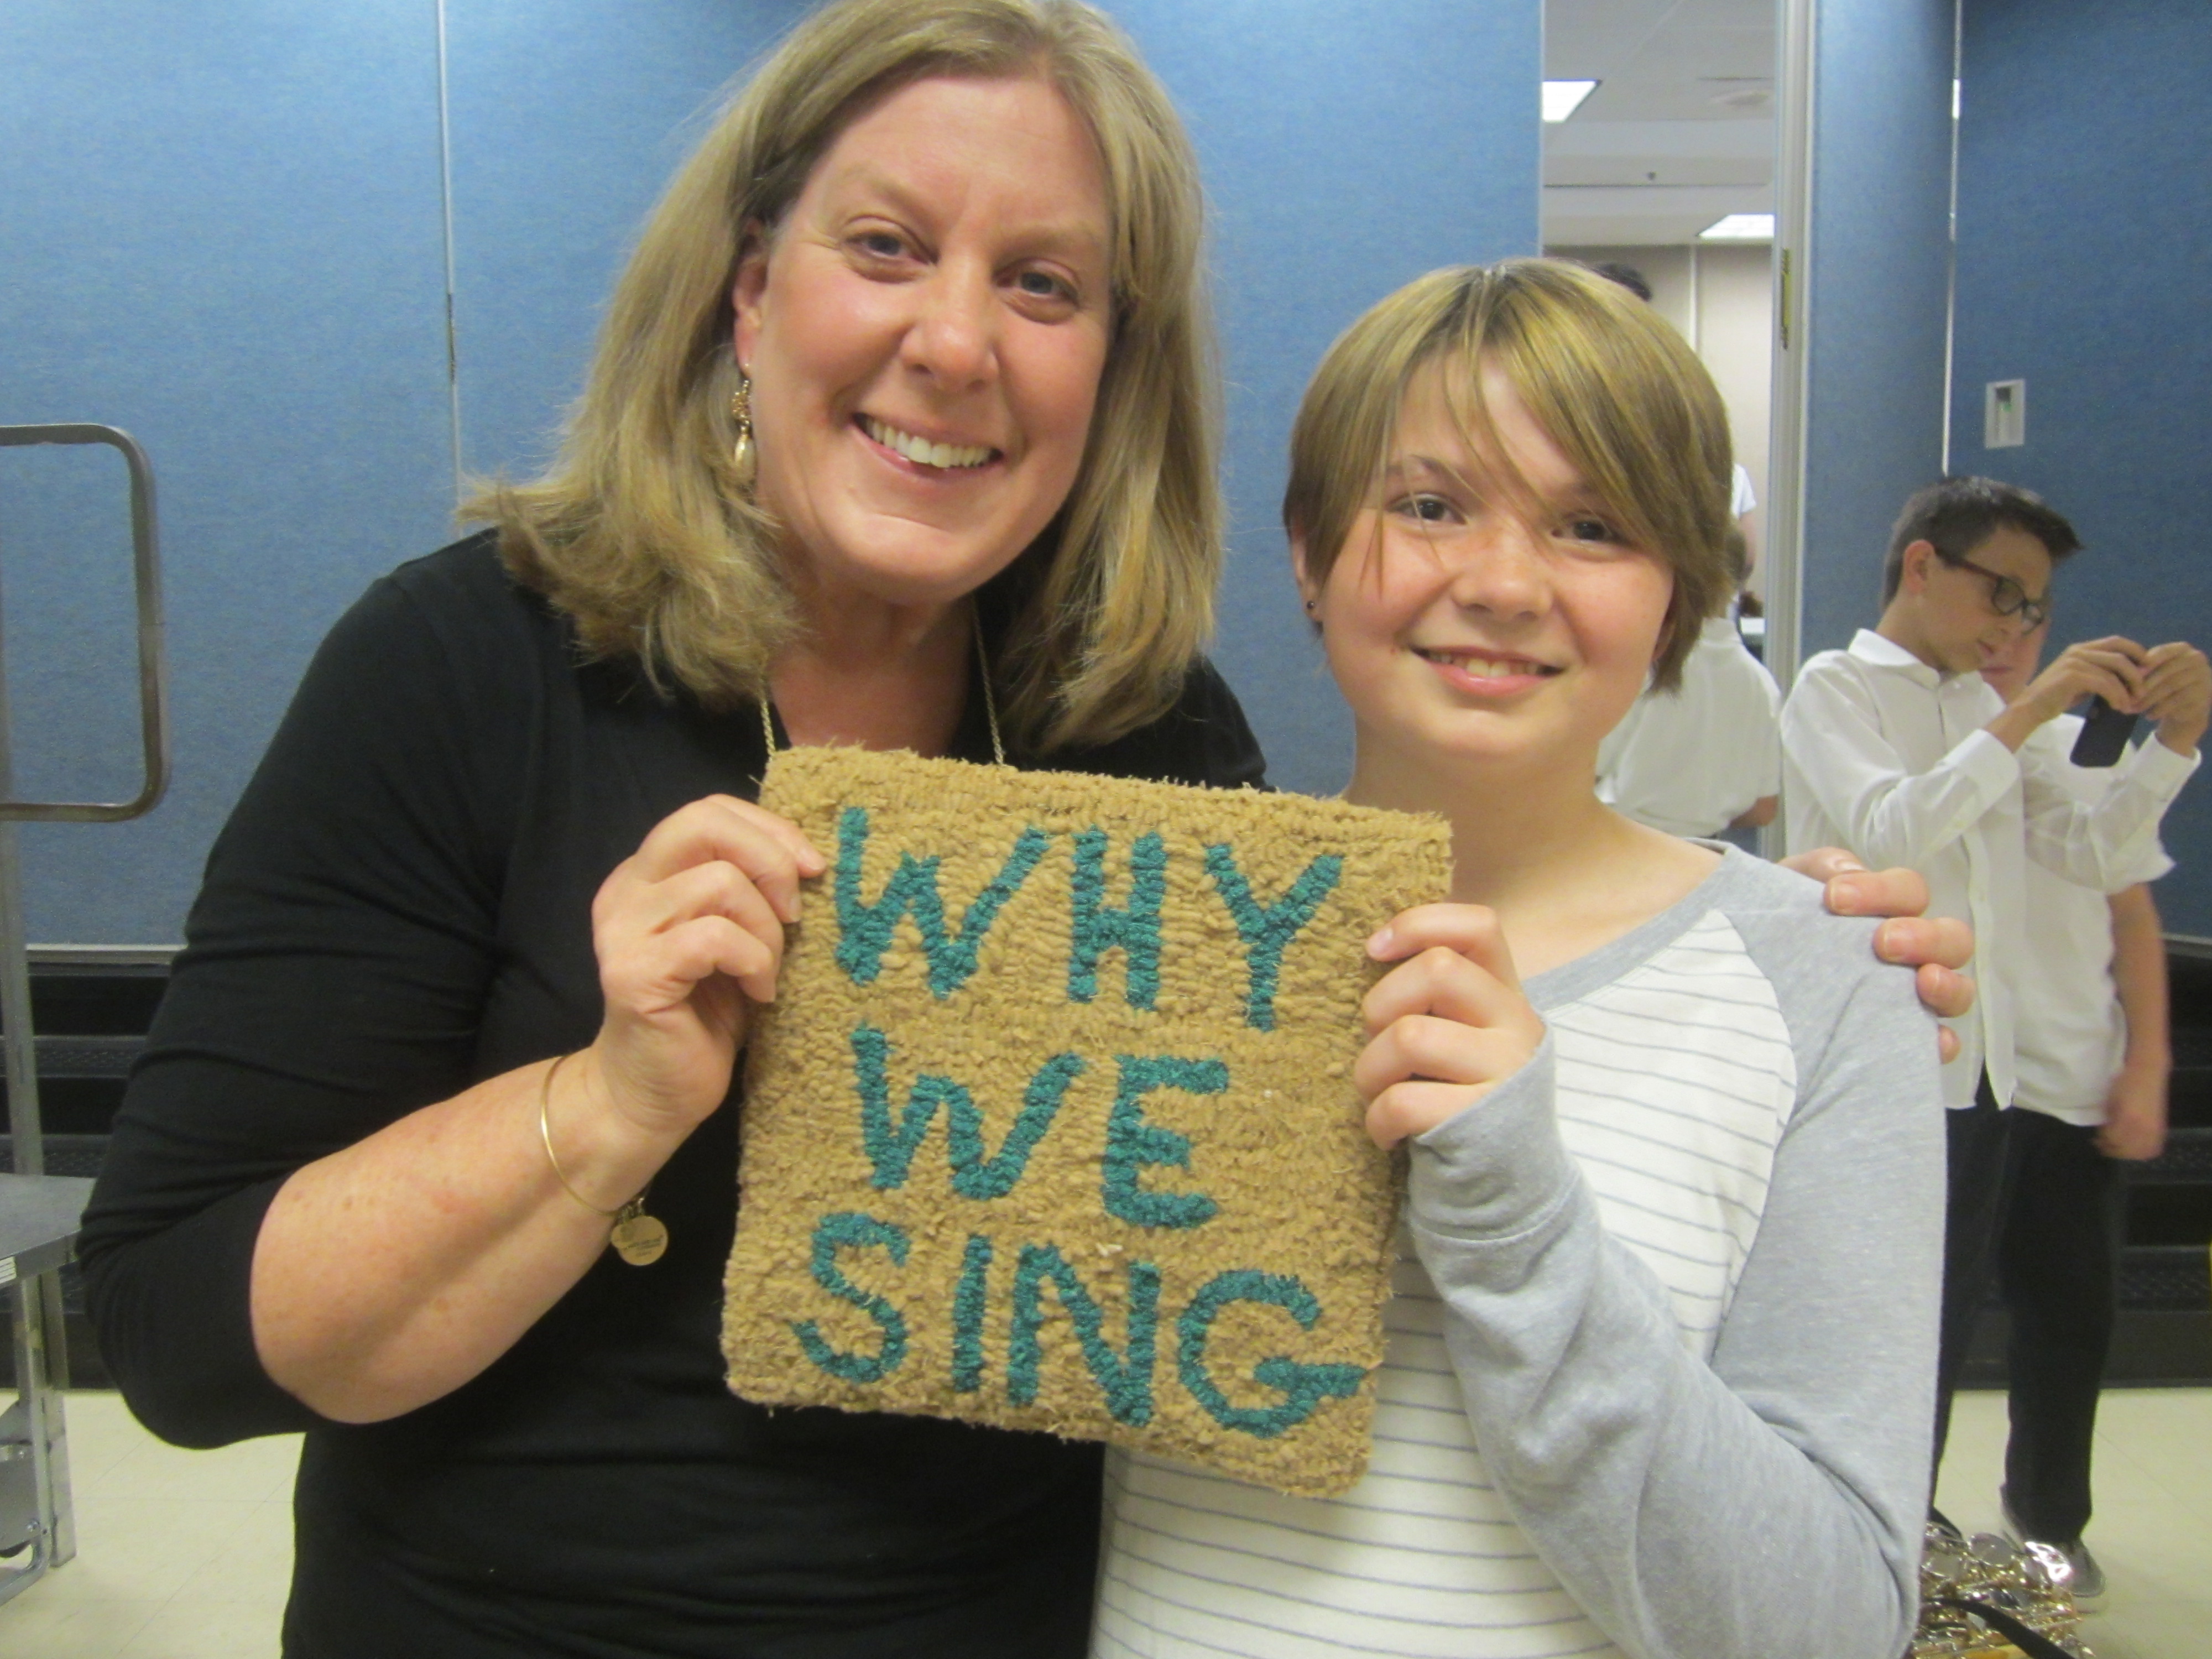 Giving Ms. Anderson the Why We Sing Rug at Year-End Concert